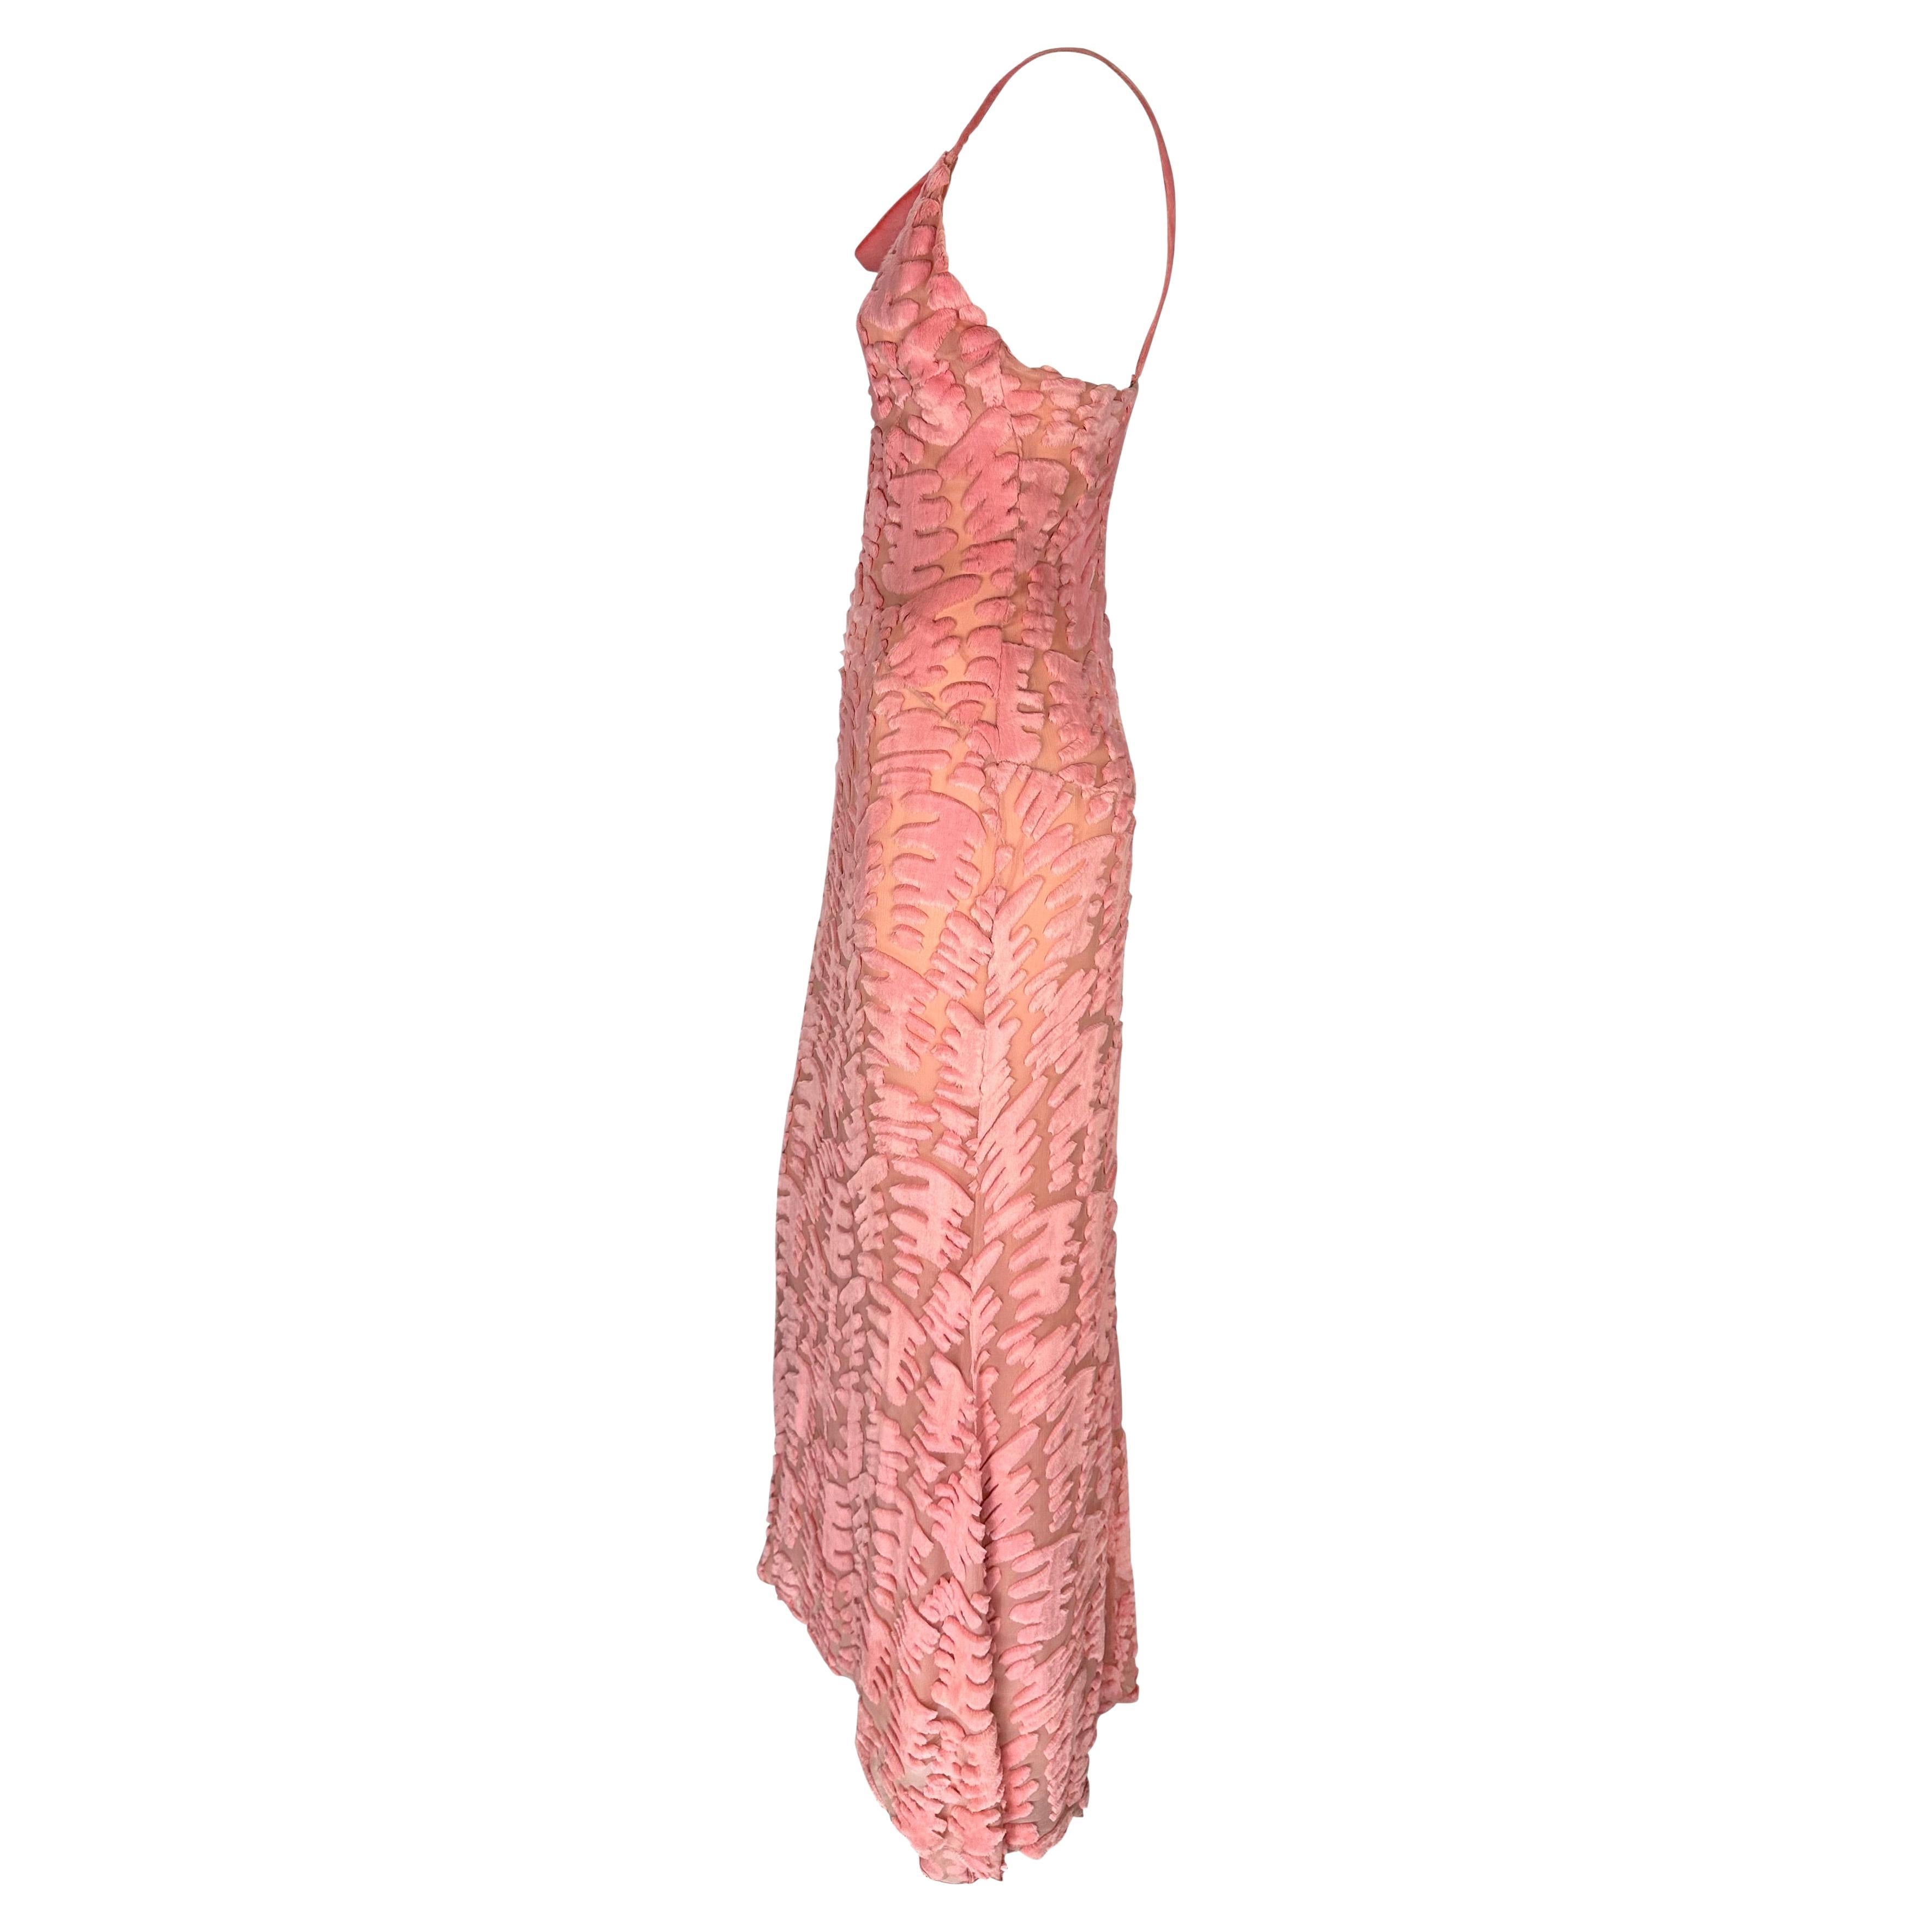 F/W 1997 Chloé by Karl Lagerfeld Pink Sheer Chiffon Abstract Chenille Gown For Sale 2